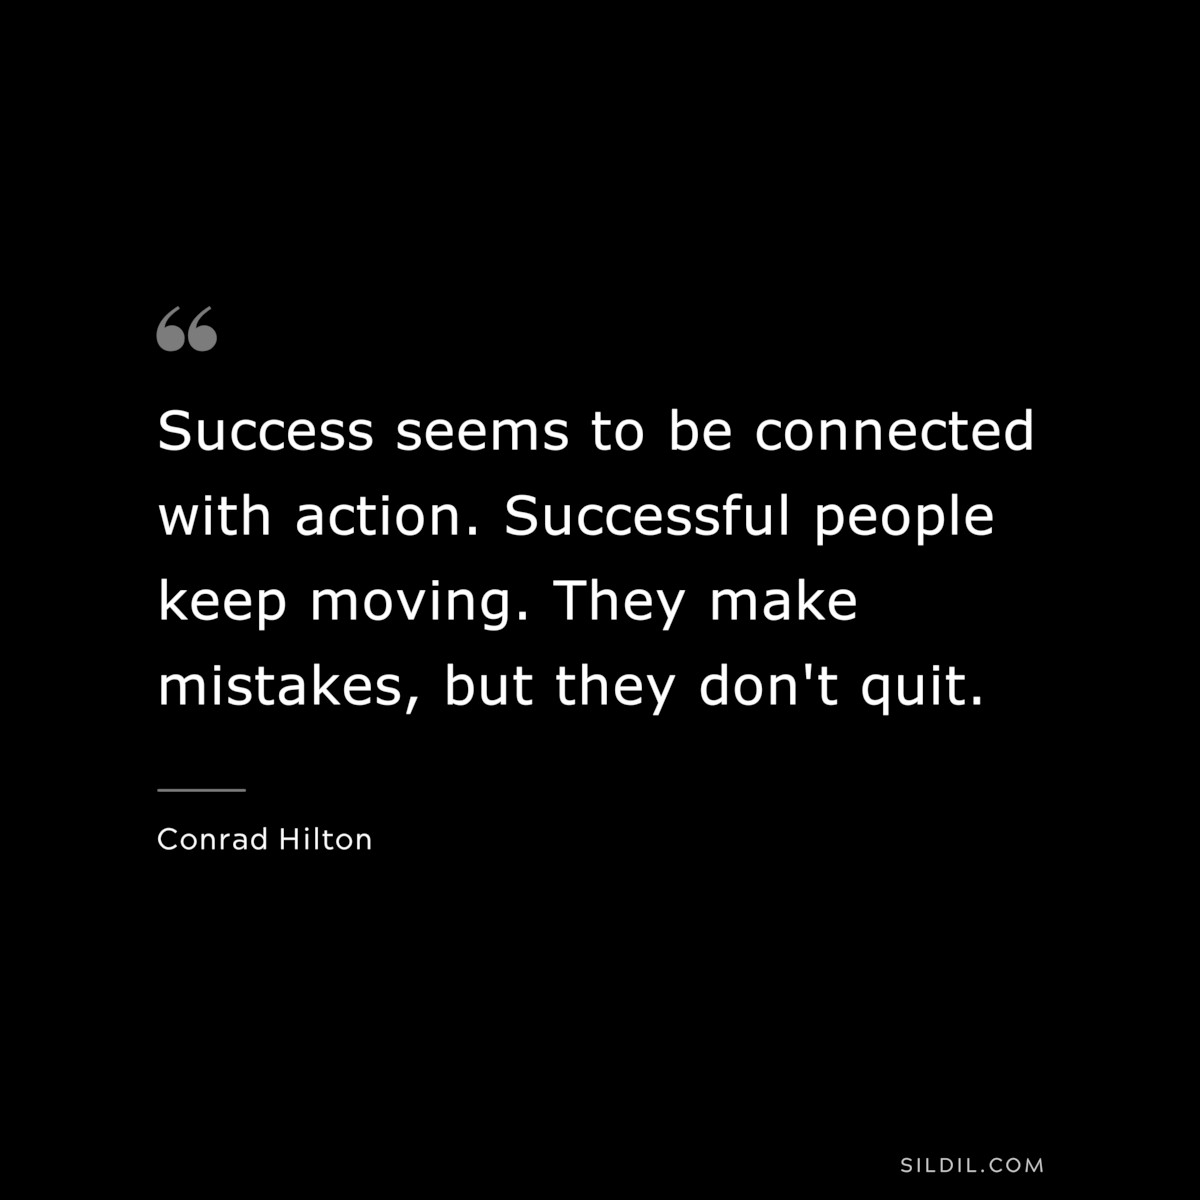 Success seems to be connected with action. Successful people keep moving. They make mistakes, but they don't quit. ― Conrad Hilton